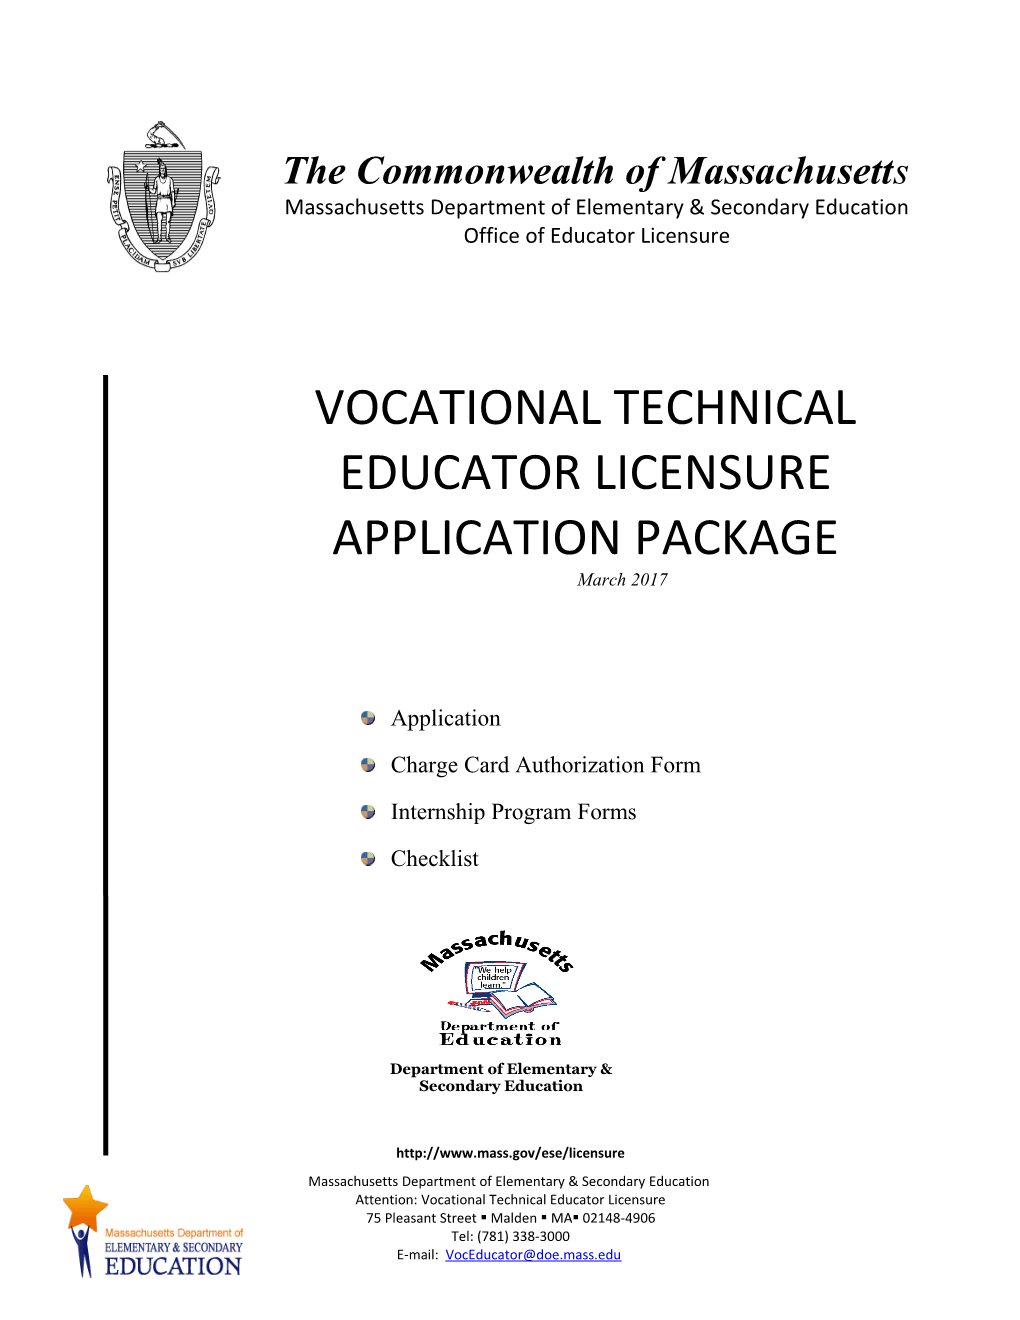 Vocational Technical Educator Licensure Application Package